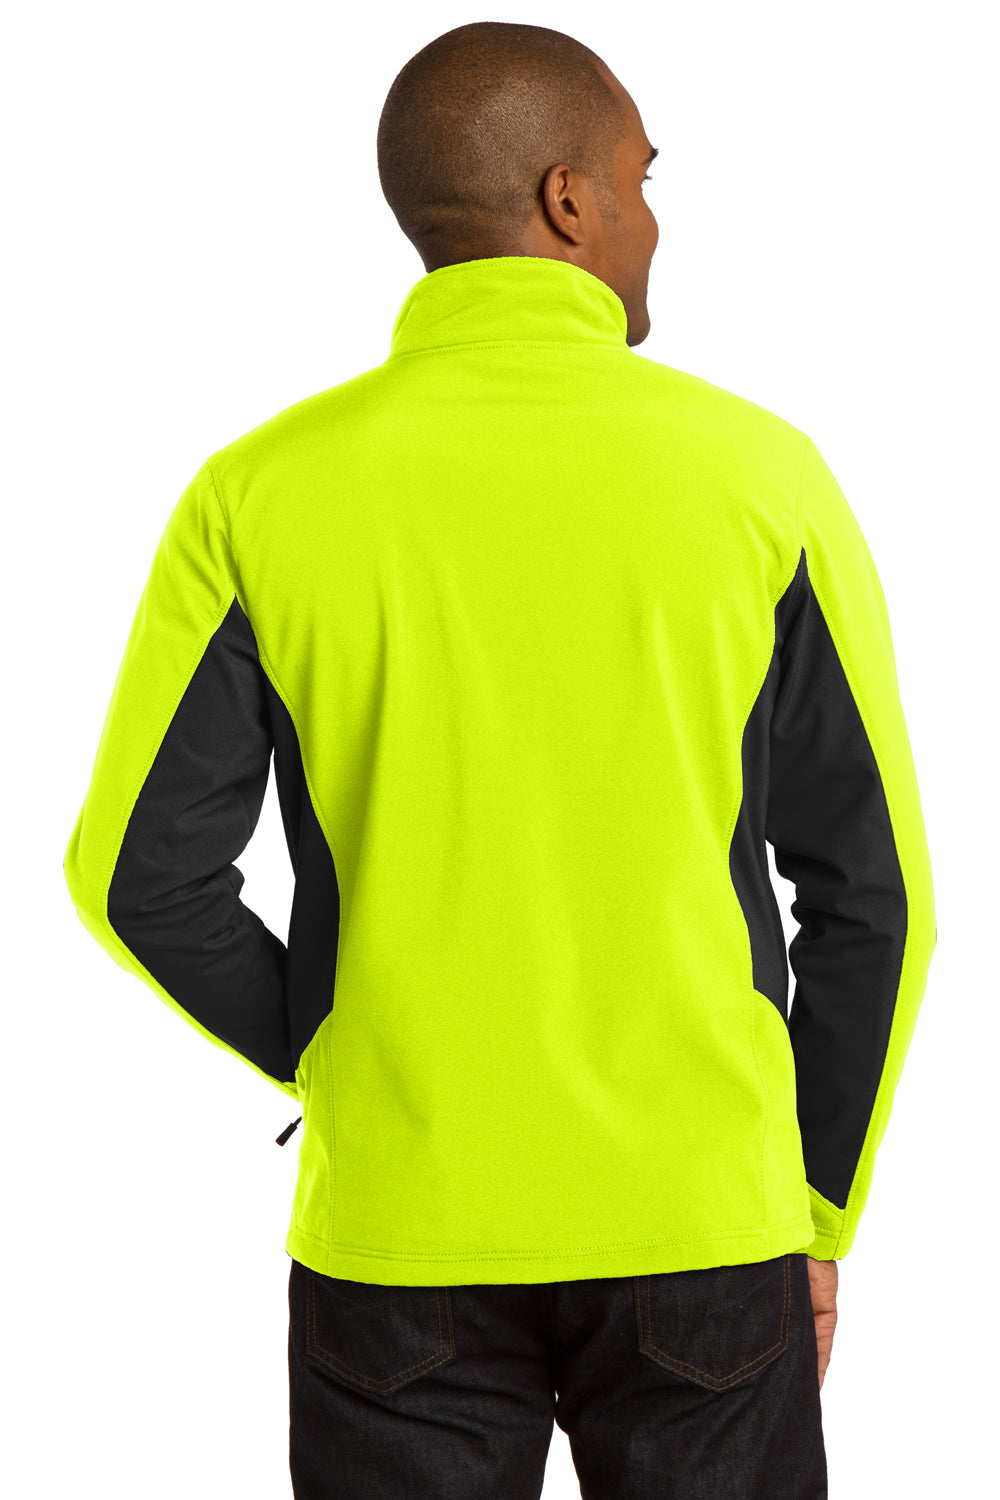 Port Authority J318 Mens Core Wind & Water Resistant Full Zip Jacket Safety Yellow/Black Back